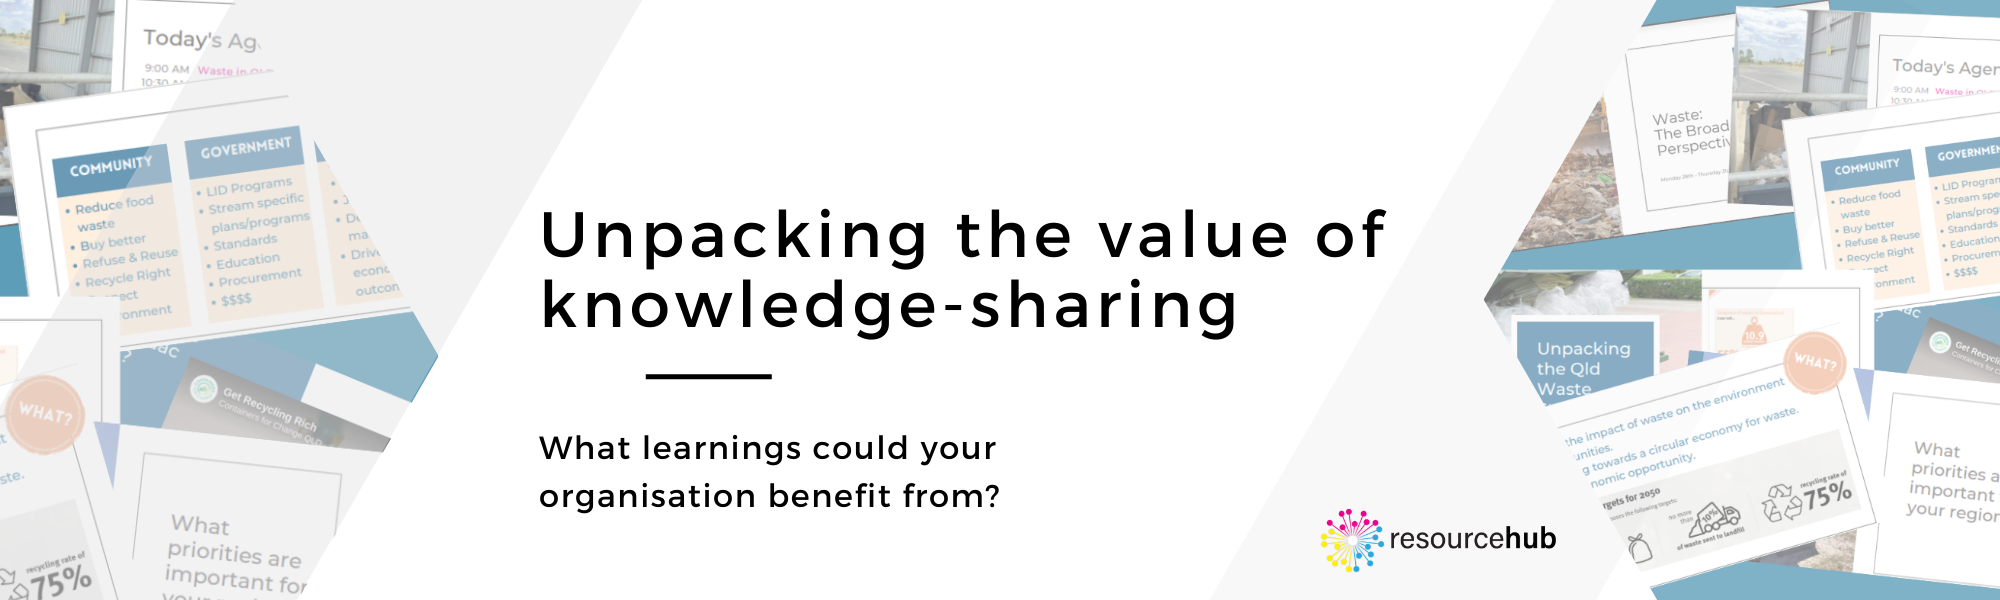 Unpacking the value of knowledge sharing